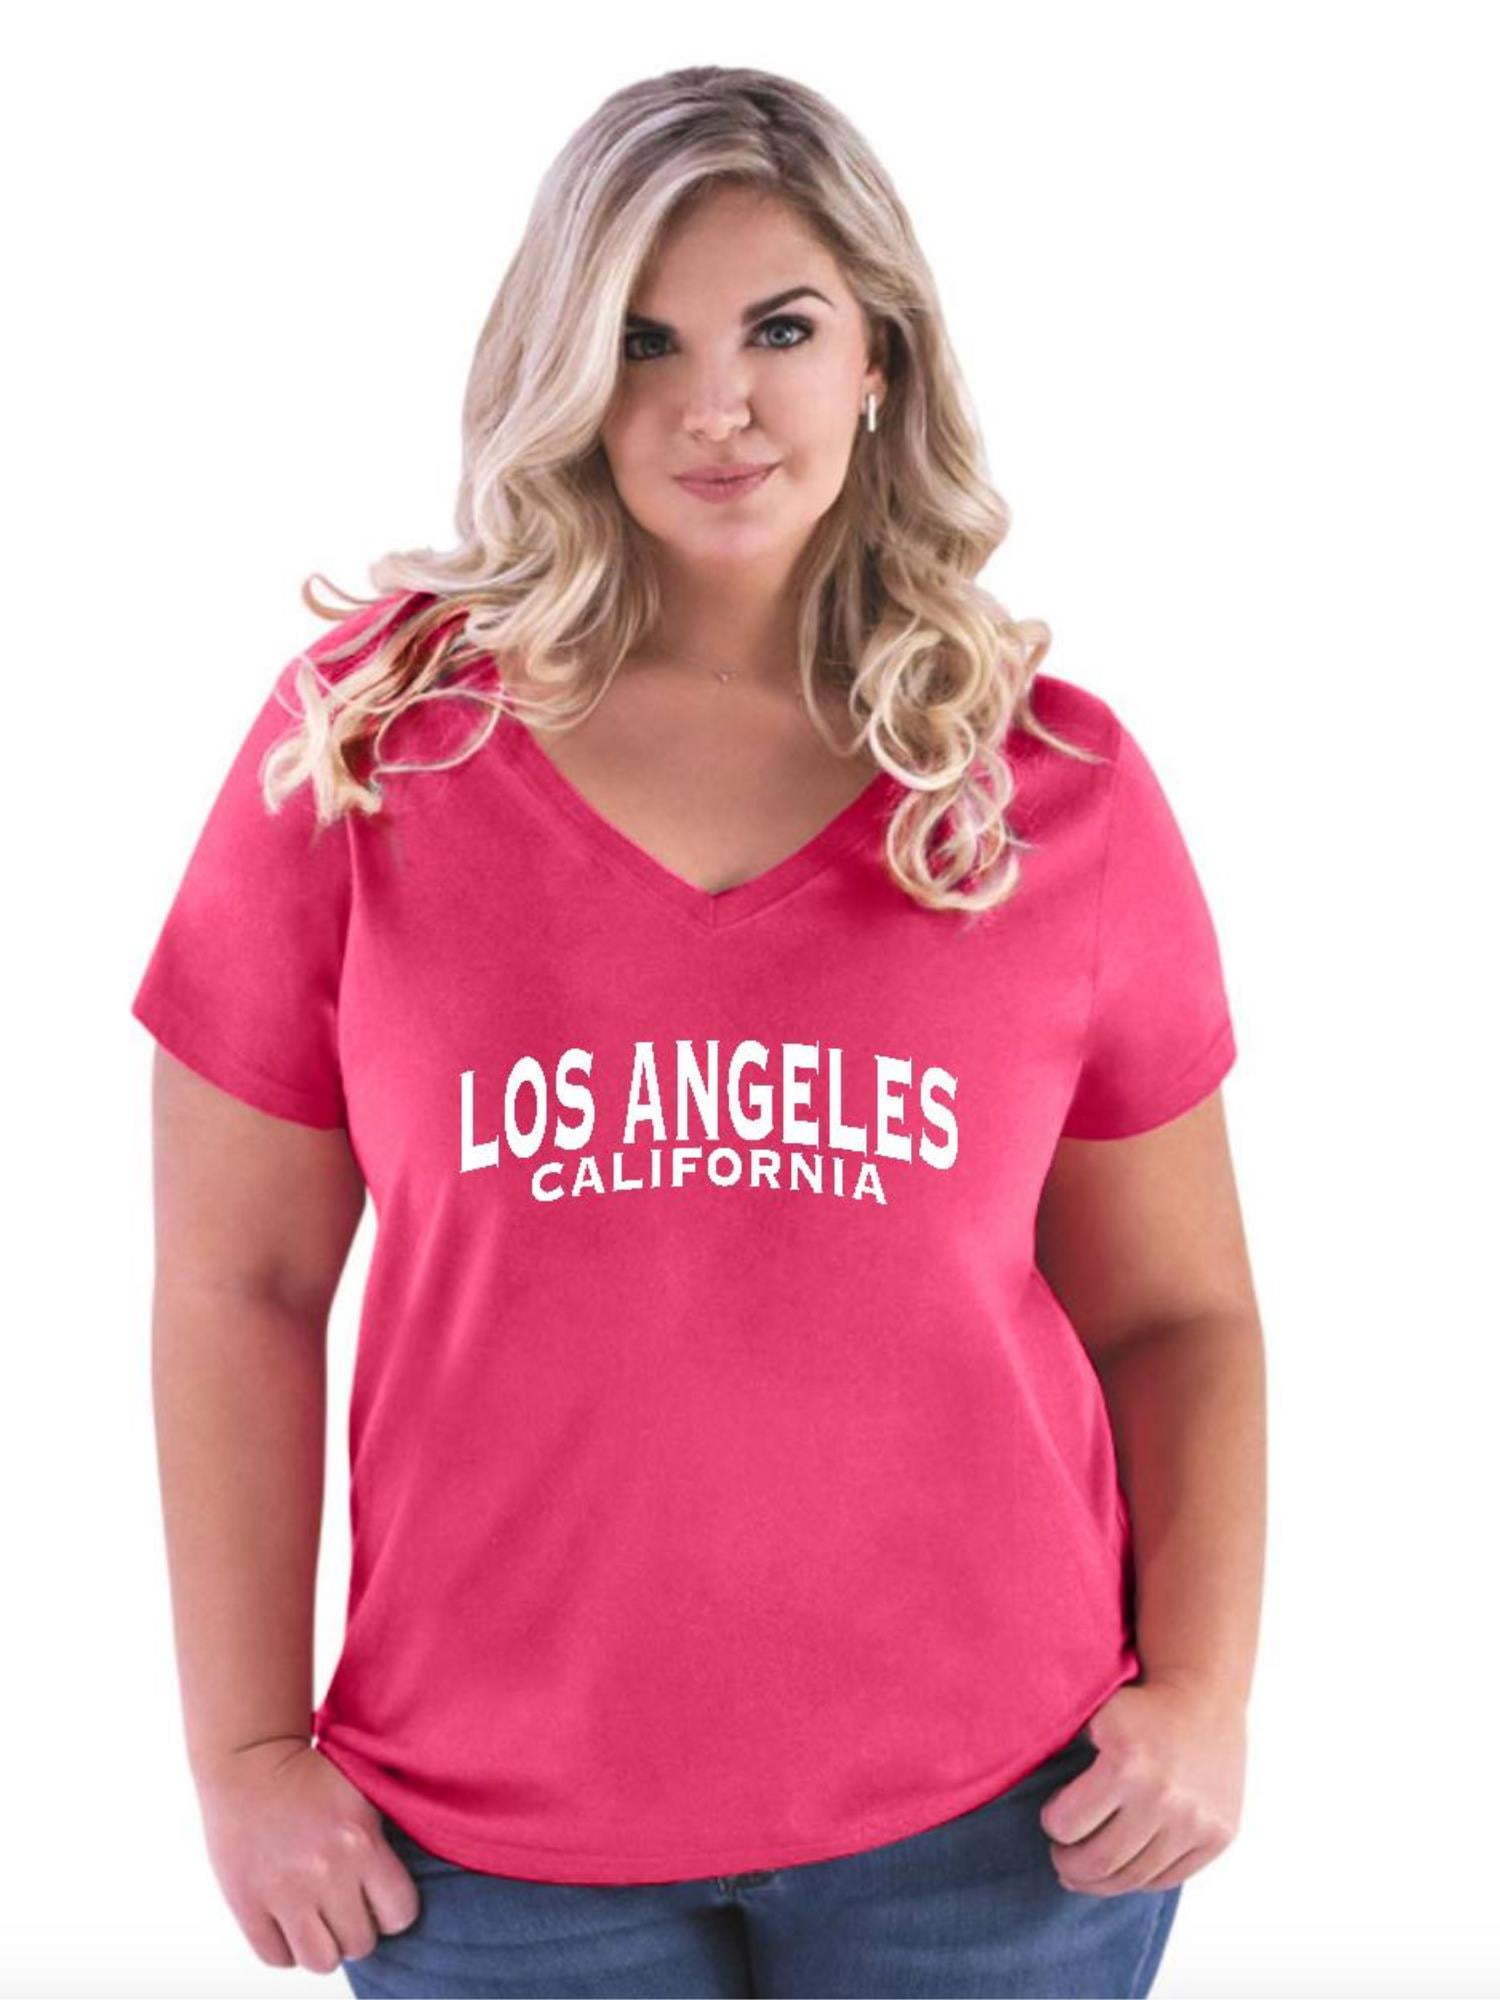 IWPF - Women's Size V-neck T-Shirt, up to Size 28 - Los Angeles - Walmart.com